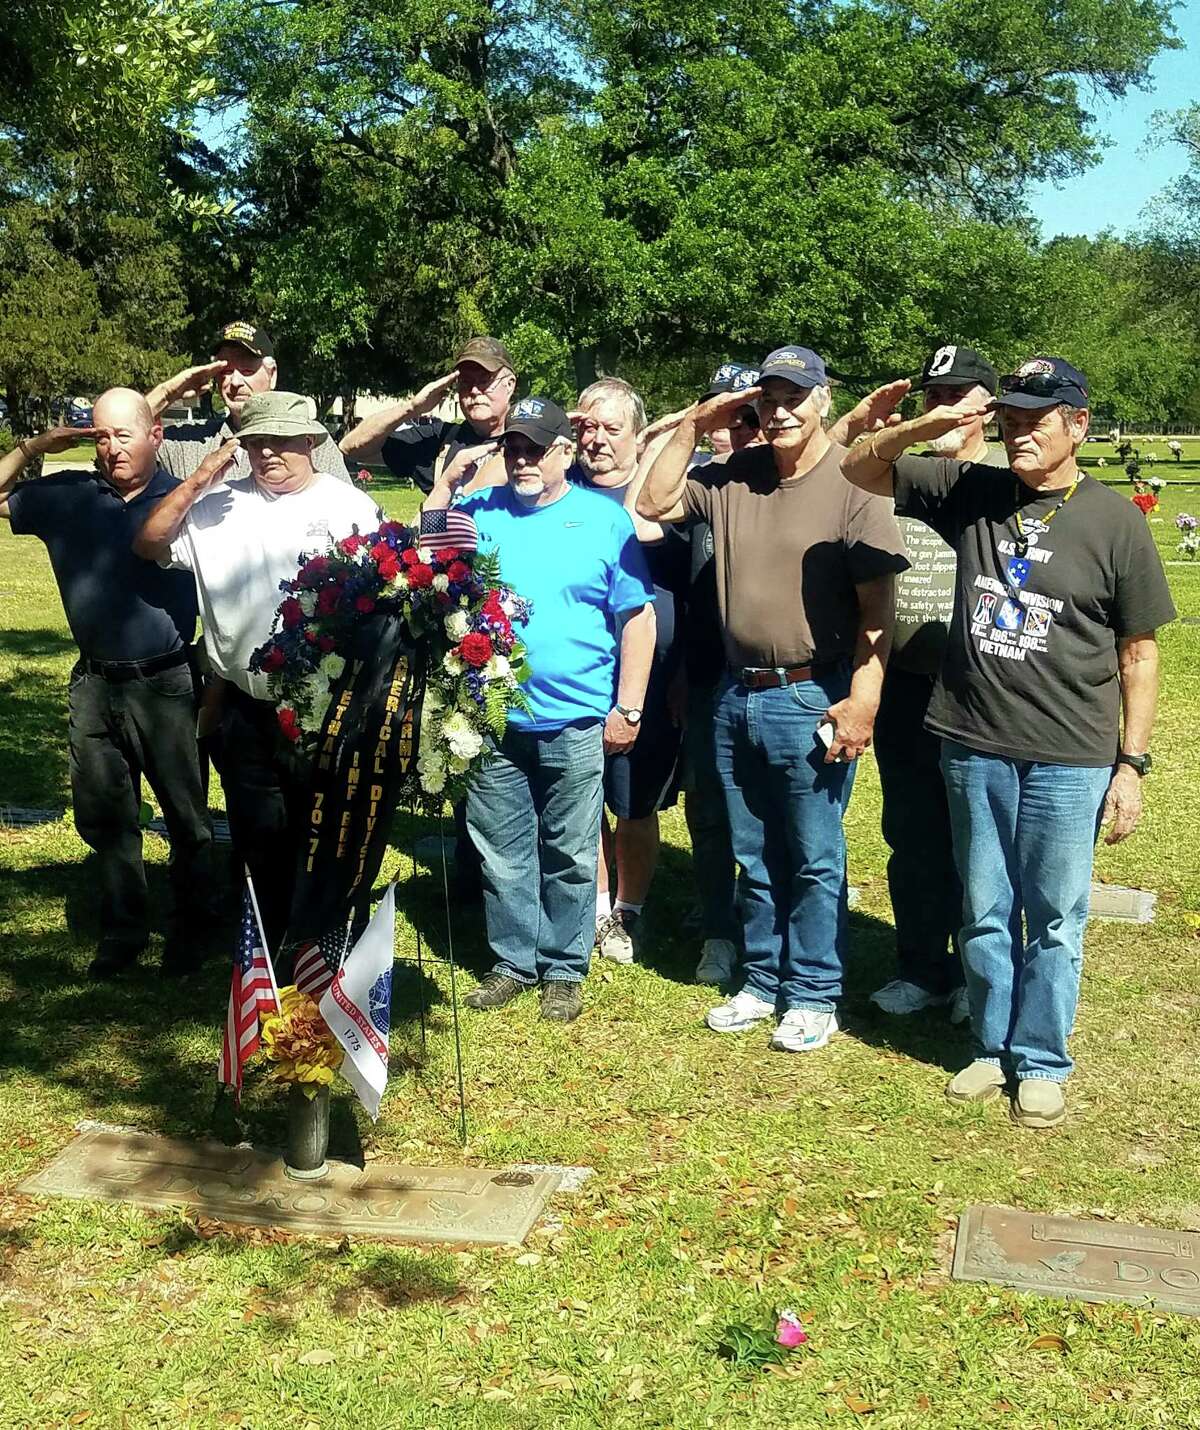 For the last 20 years, about 50 Vietnam veterans have reunited for camping and barbecues across the county. But this month, the veterans met in Willis and traveled with two brothers to Rosewood cemetery in Humble